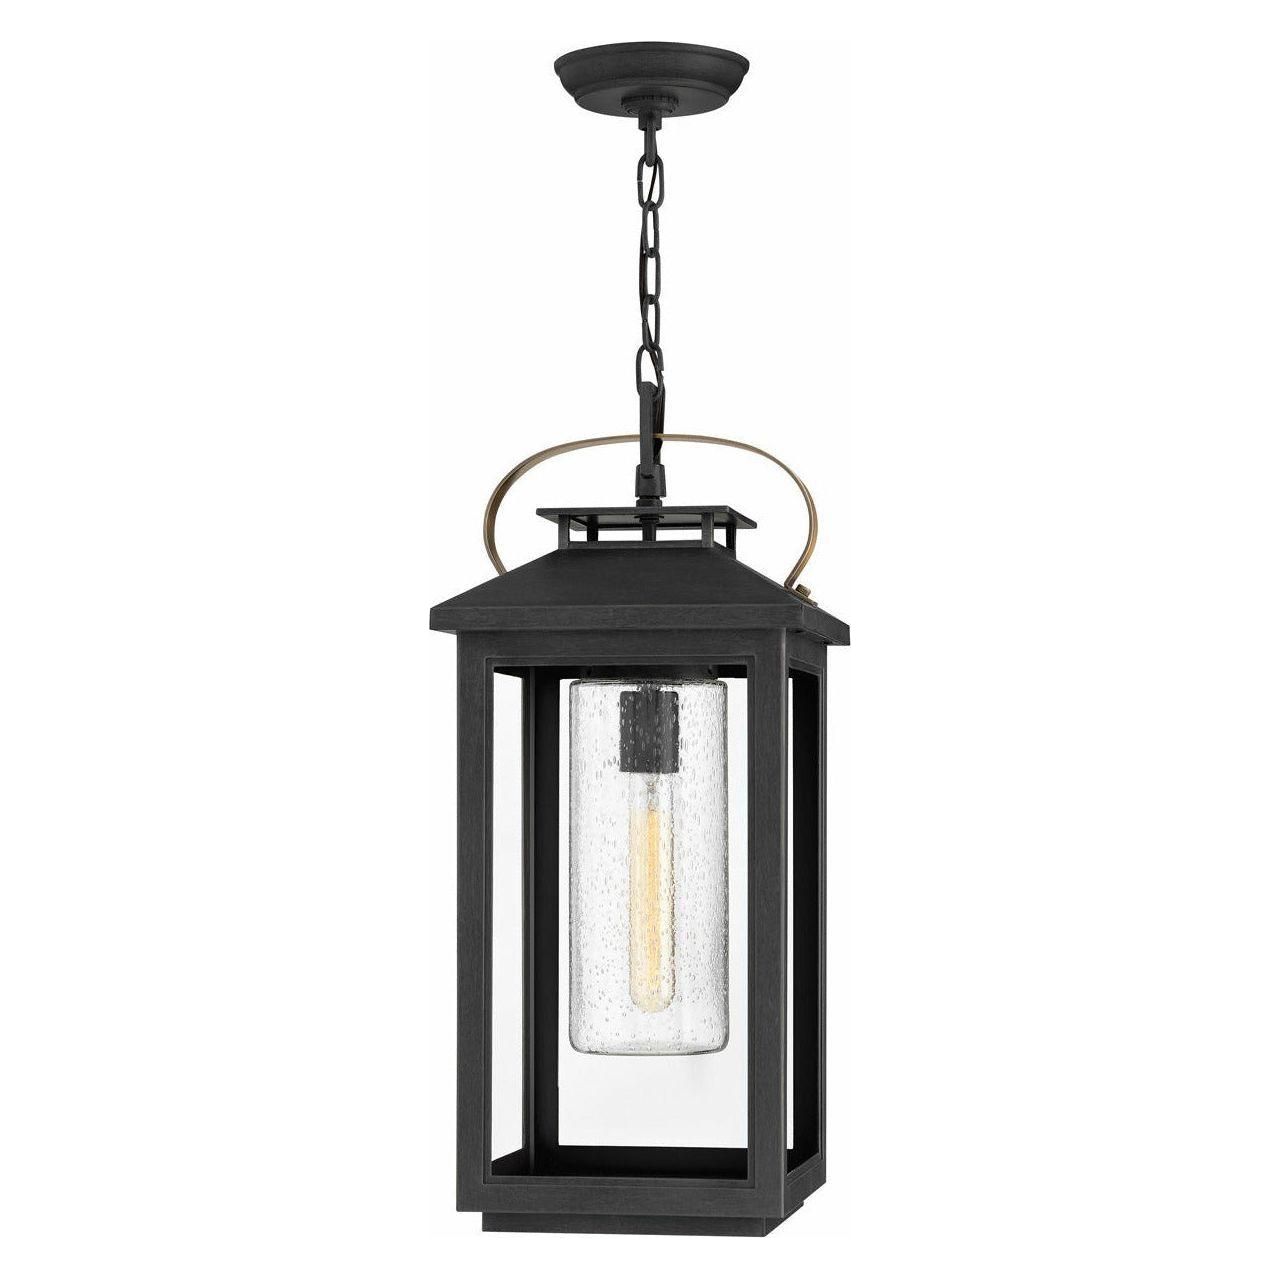 Hinkley - Hinkley Atwater Outdoor Pendant - Lights Canada